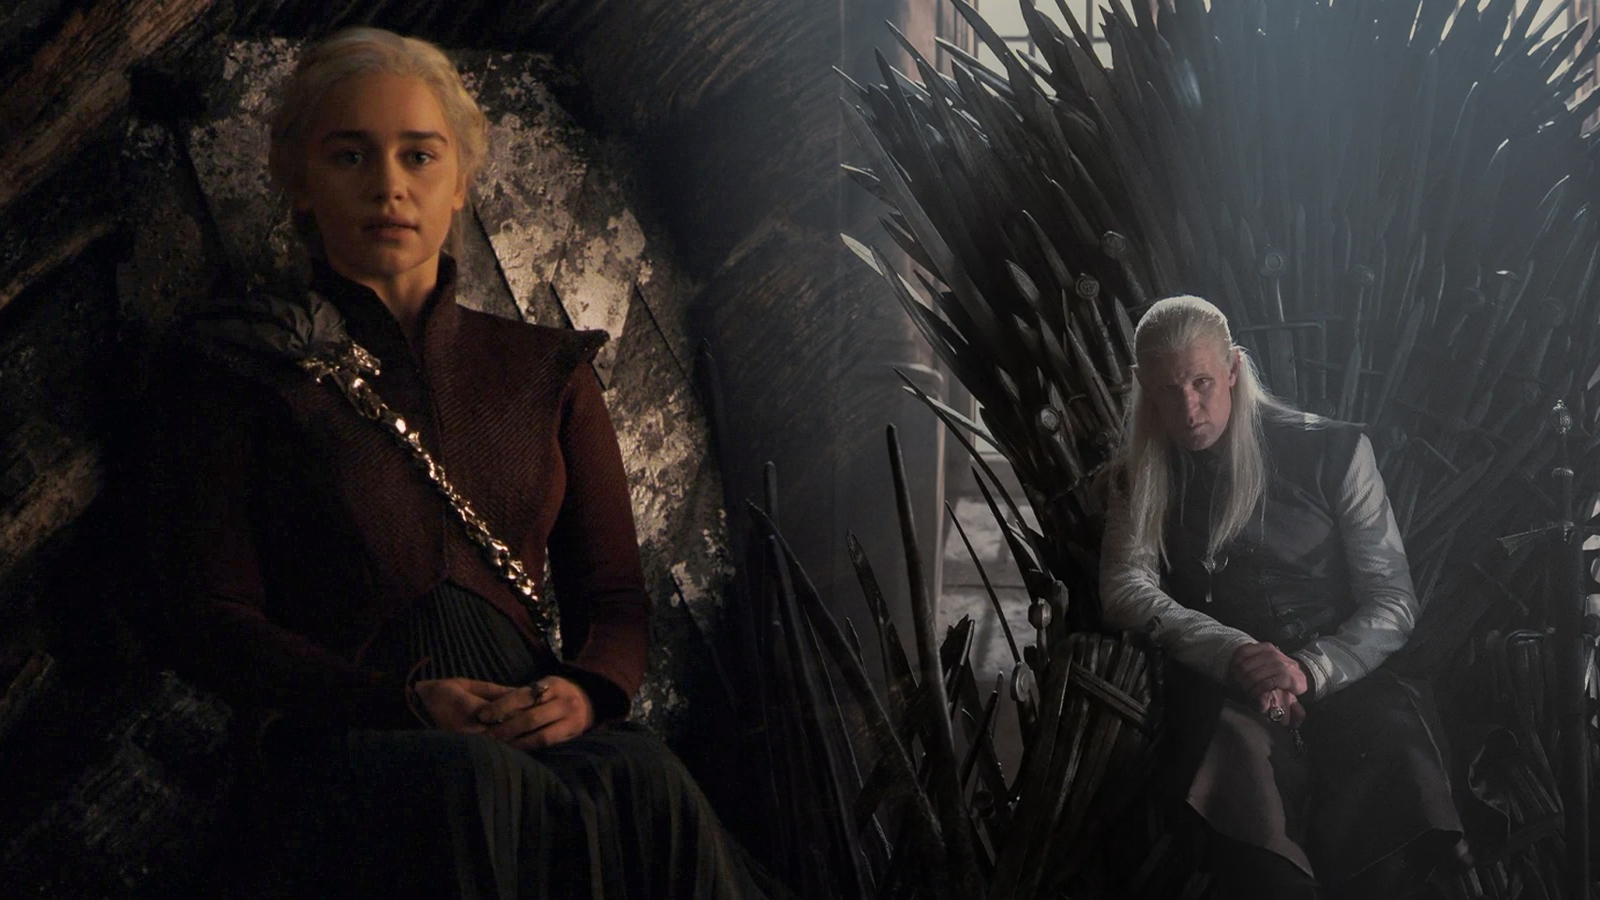 HBO’s next Game of Thrones show isn’t what we expected